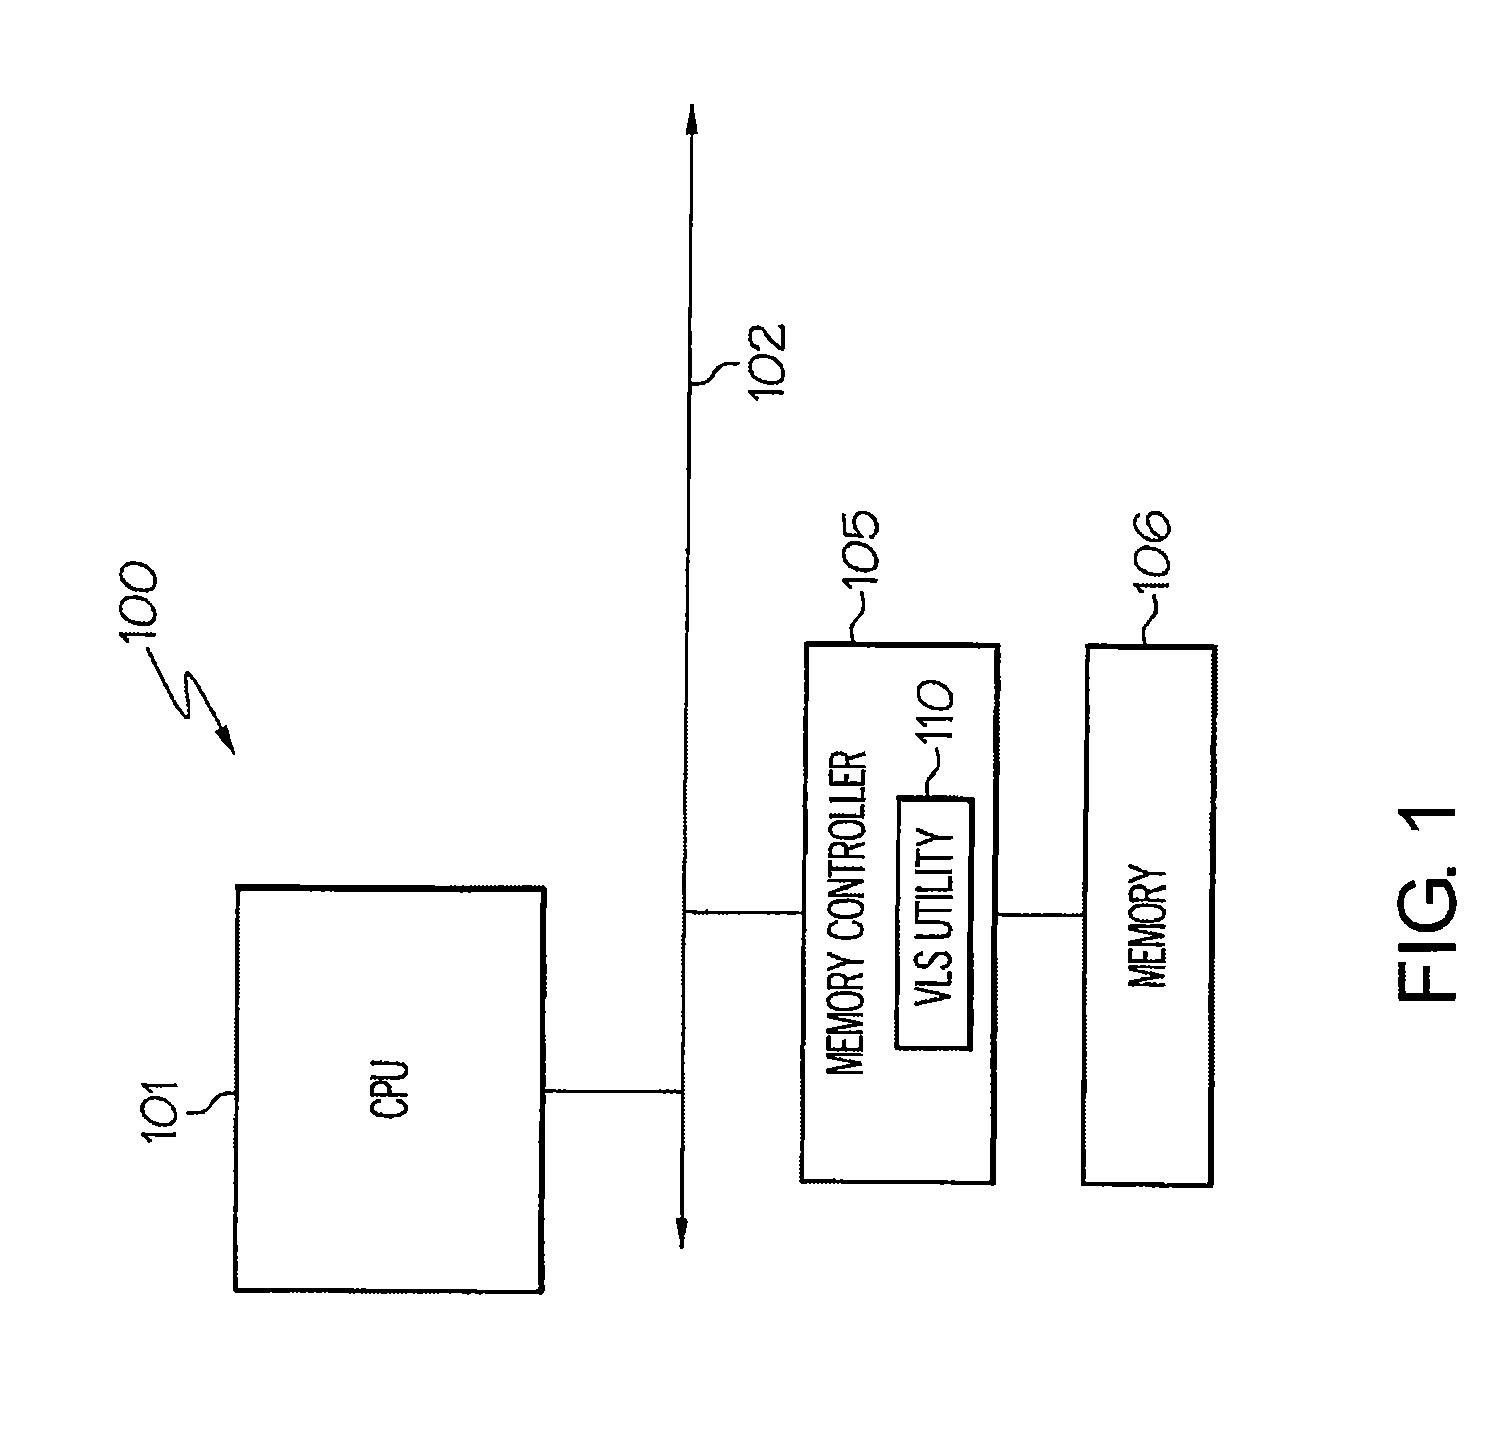 Structure for data bus bandwidth scheduling in an fbdimm memory system operating in variable latency mode